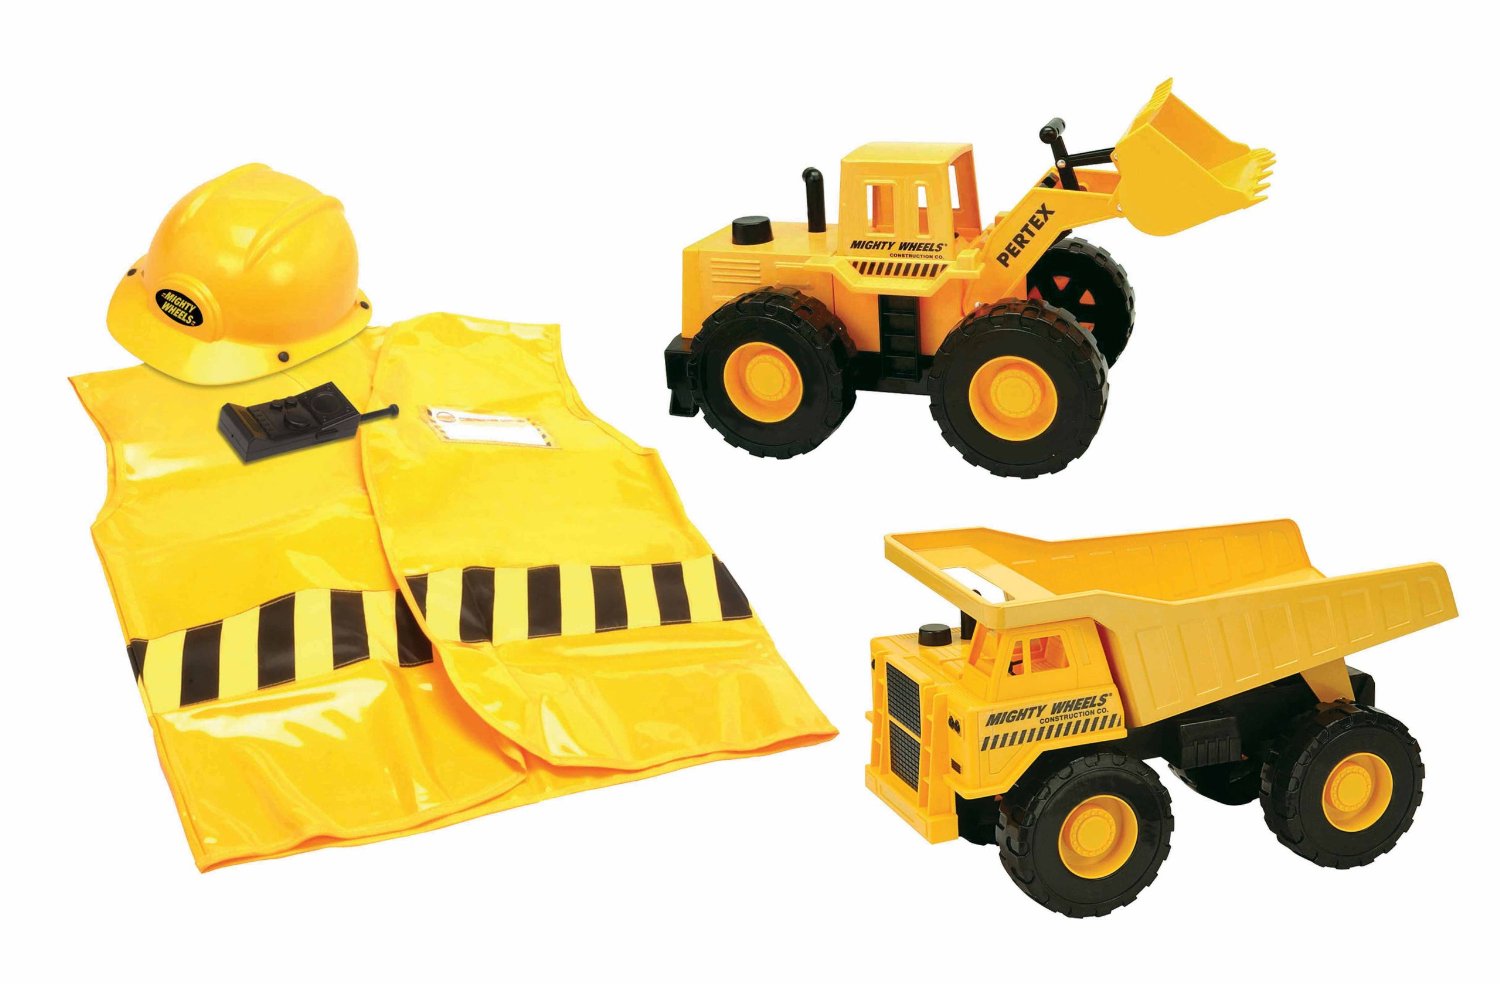 Mighty Wheels Steel Truck Roleplay Diecast Set Only $29.99 (Reg. $49.99)